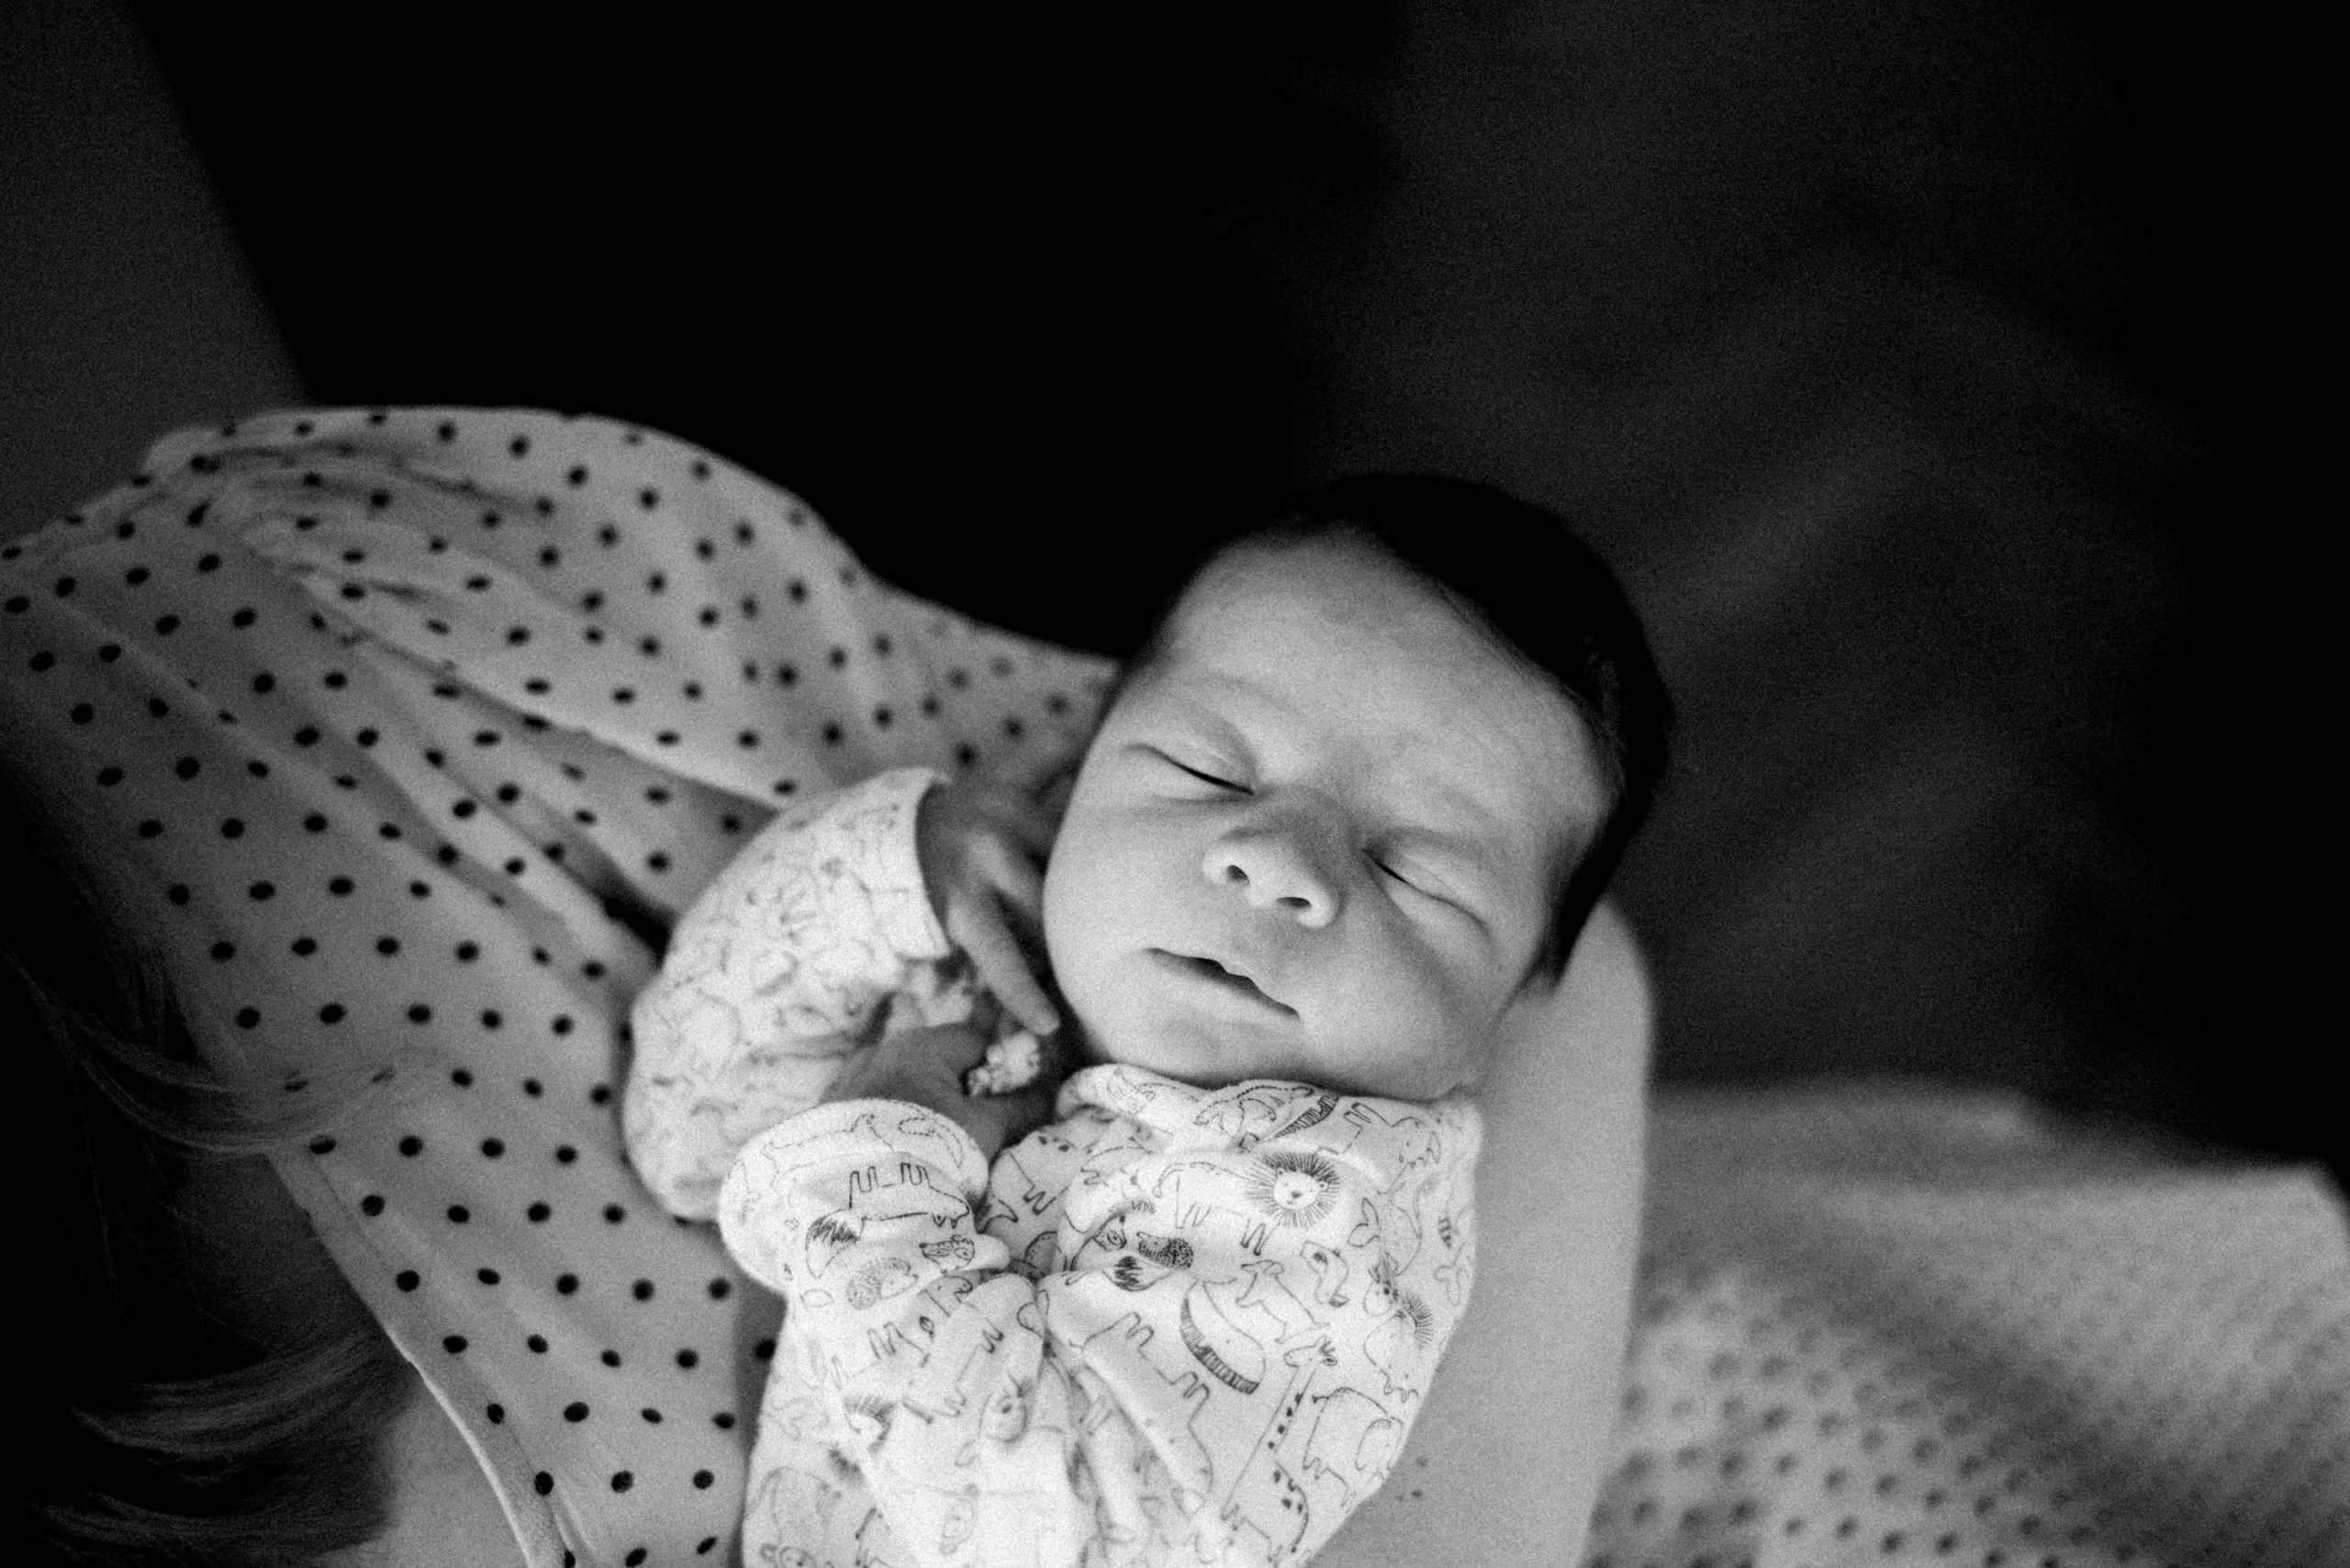 Black and White photo of a newborn baby in his Mum's arms, taken at home in Milan, Italy.